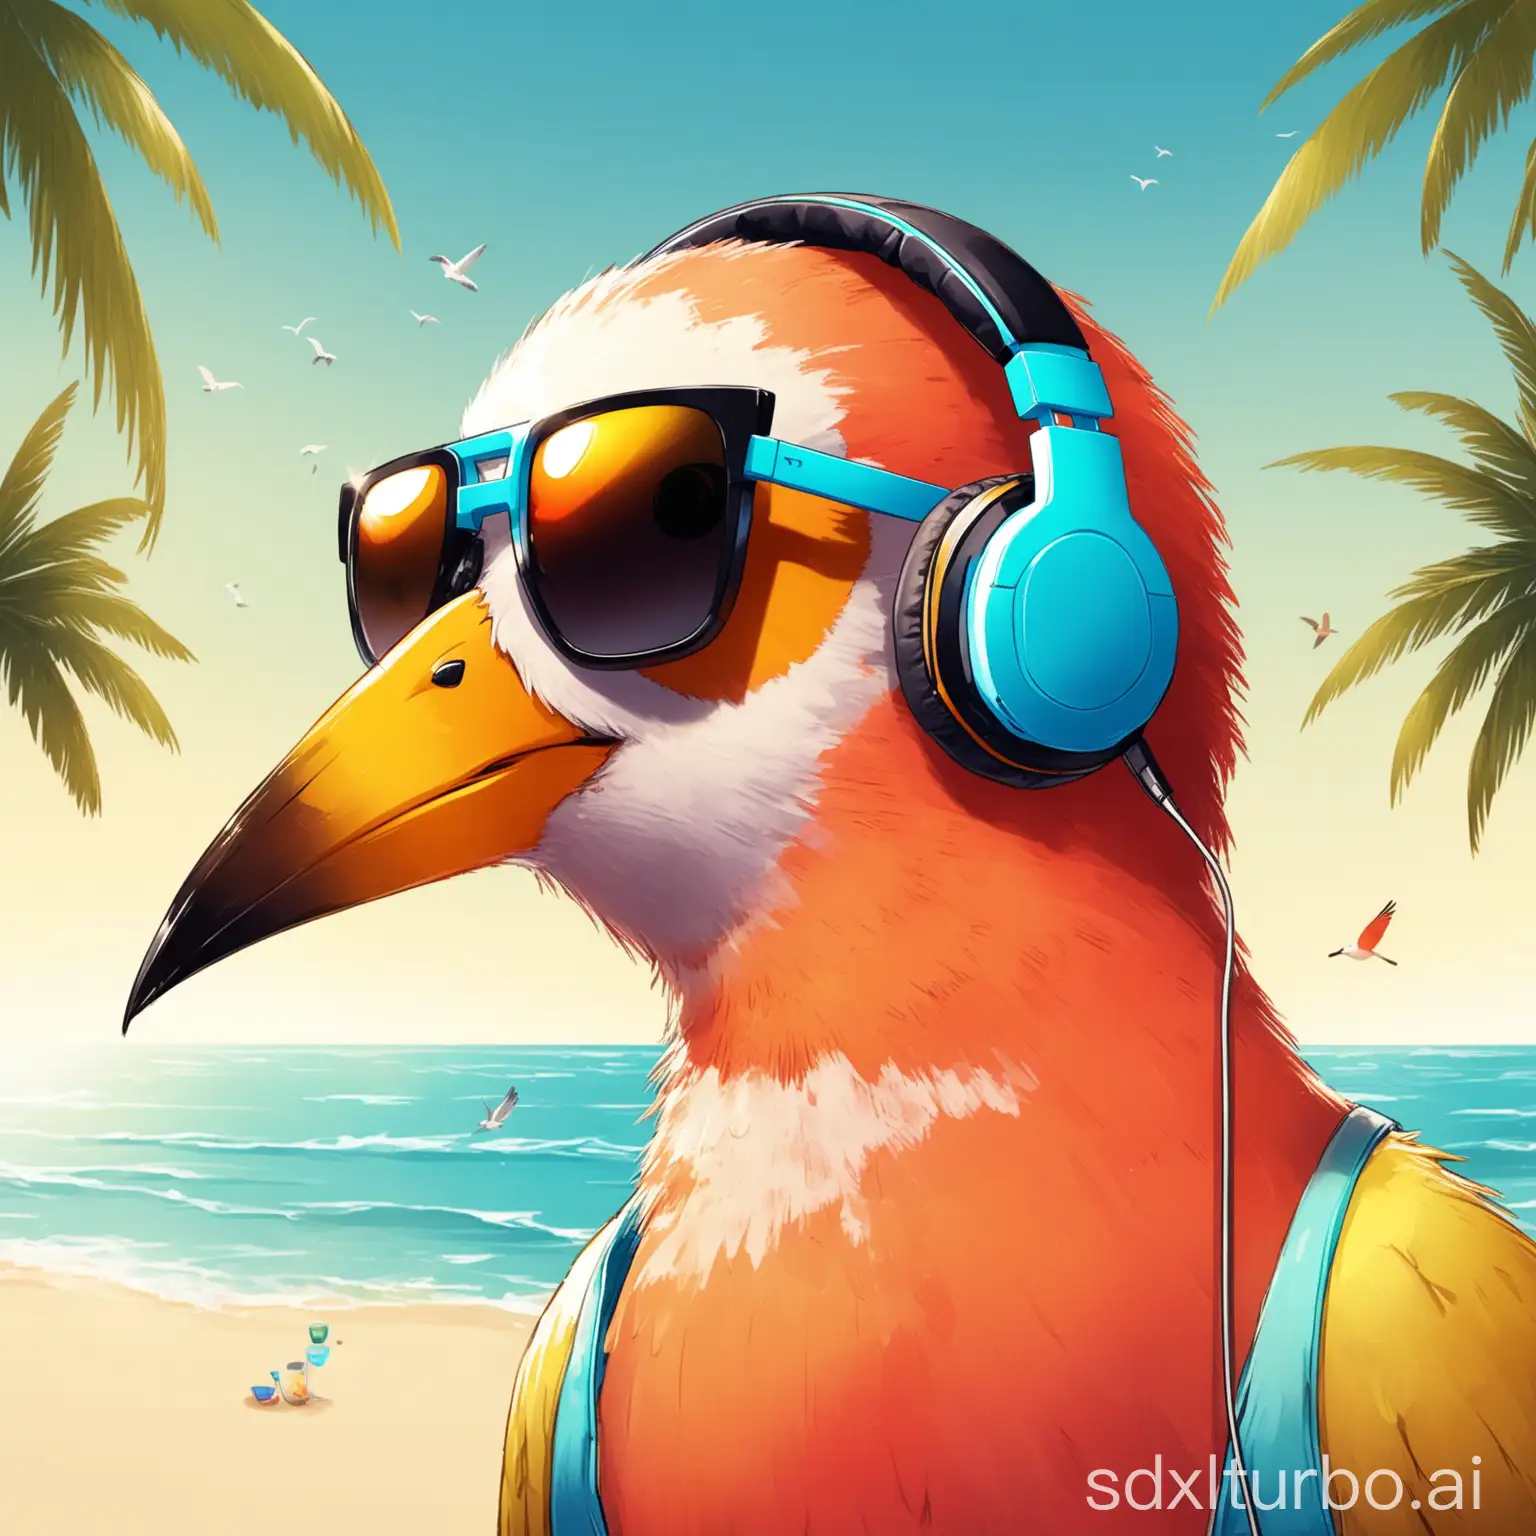 A profile picture of a cool beach bird with his headphones, sunglasses and partying